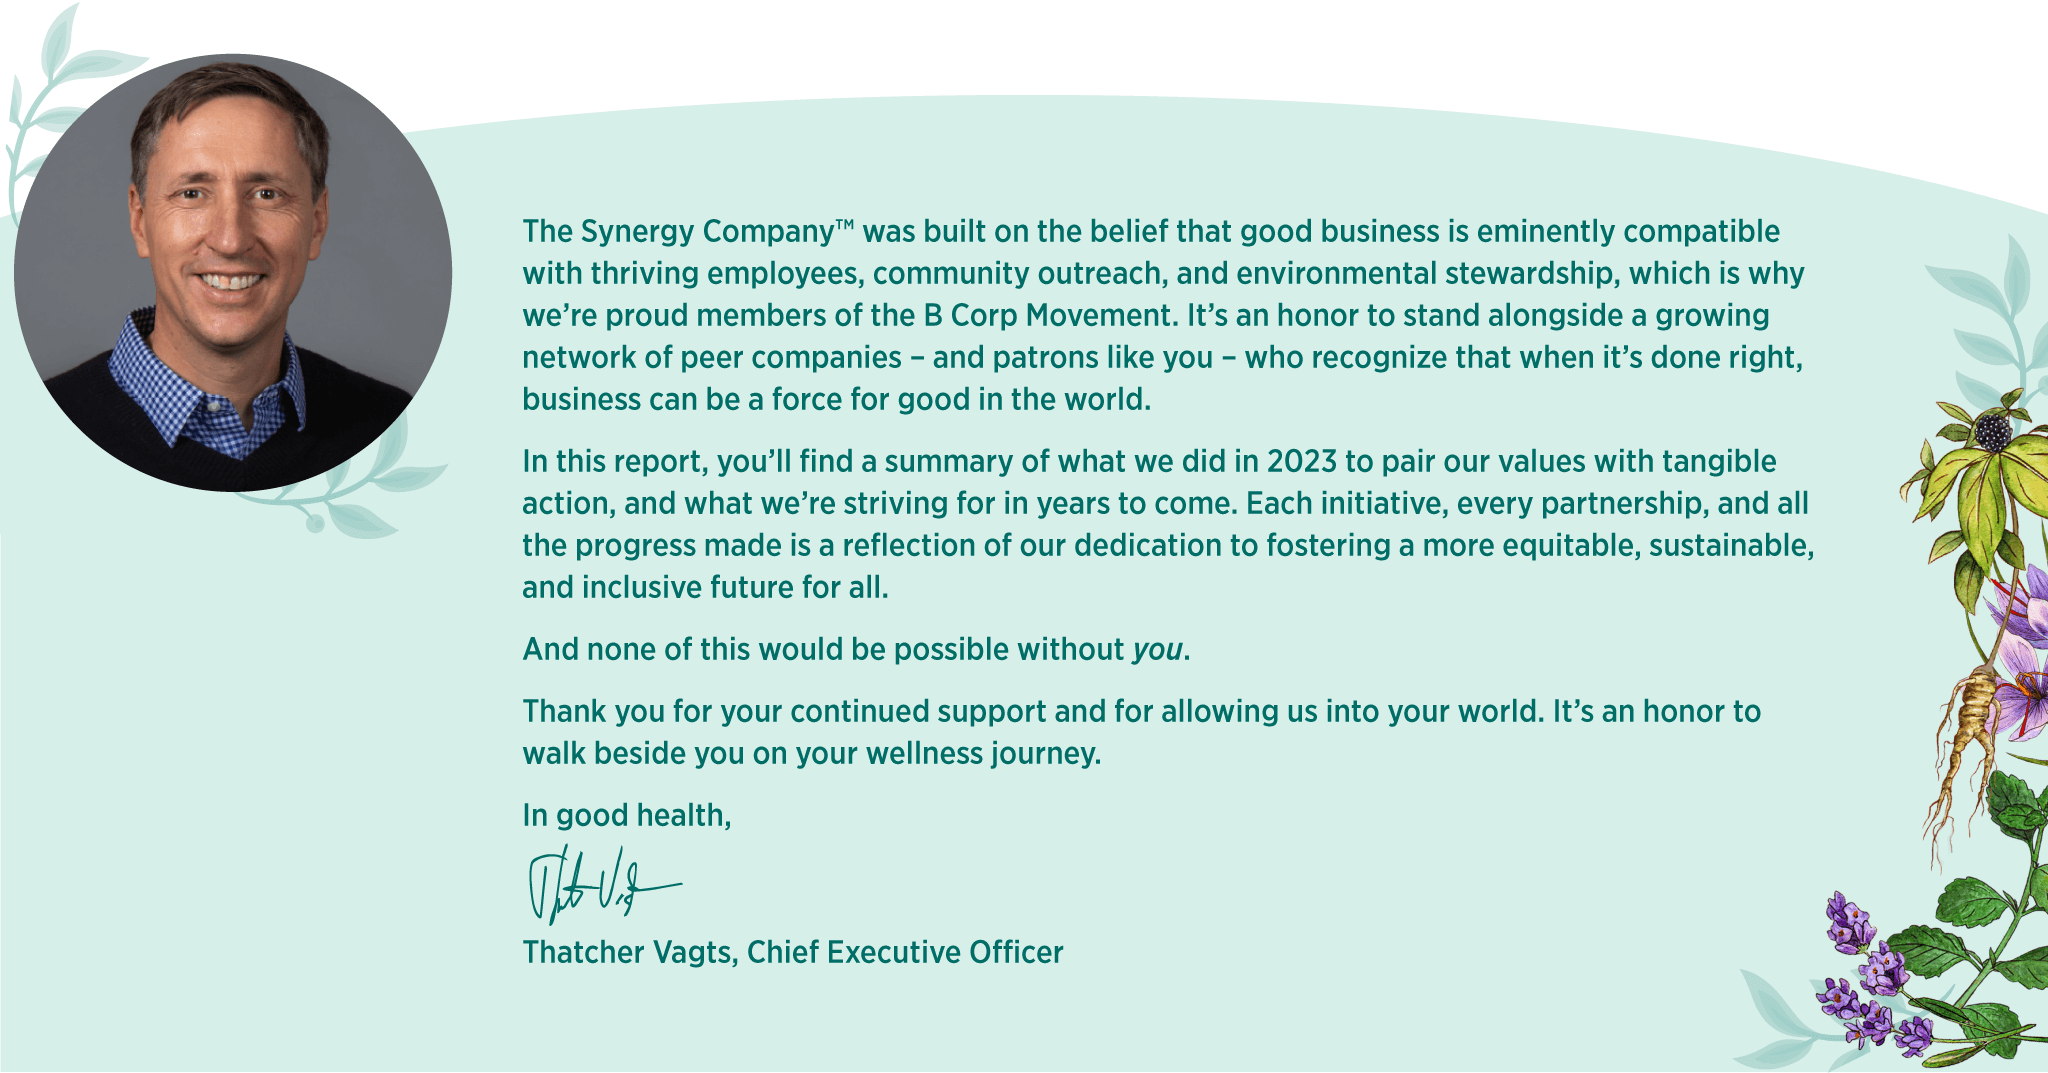 The Synergy Company™ was built on the belief that good business is eminently compatible with thriving employees, community outreach, and environmental stewardship, which is why we’re proud members of the B Corp Movement. It’s an honor to stand alongside a growing network of peer companies – and patrons like you – who recognize that when it’s done right, business can be a force for good in the world. In this report, you’ll find a summary of what we did in 2023 to pair our values with tangible action, and what we’re striving for in years to come. Each initiative, every partnership, and all the progress made is a reflection of our dedication to fostering a more equitable, sustainable, and inclusive future for all. And none of this would be possible without you. Thank you for your continued support and for allowing us into your world. It’s an honor to walk beside you on your wellness journey. In good health, Thatcher Vagts, Chief Executive Officer